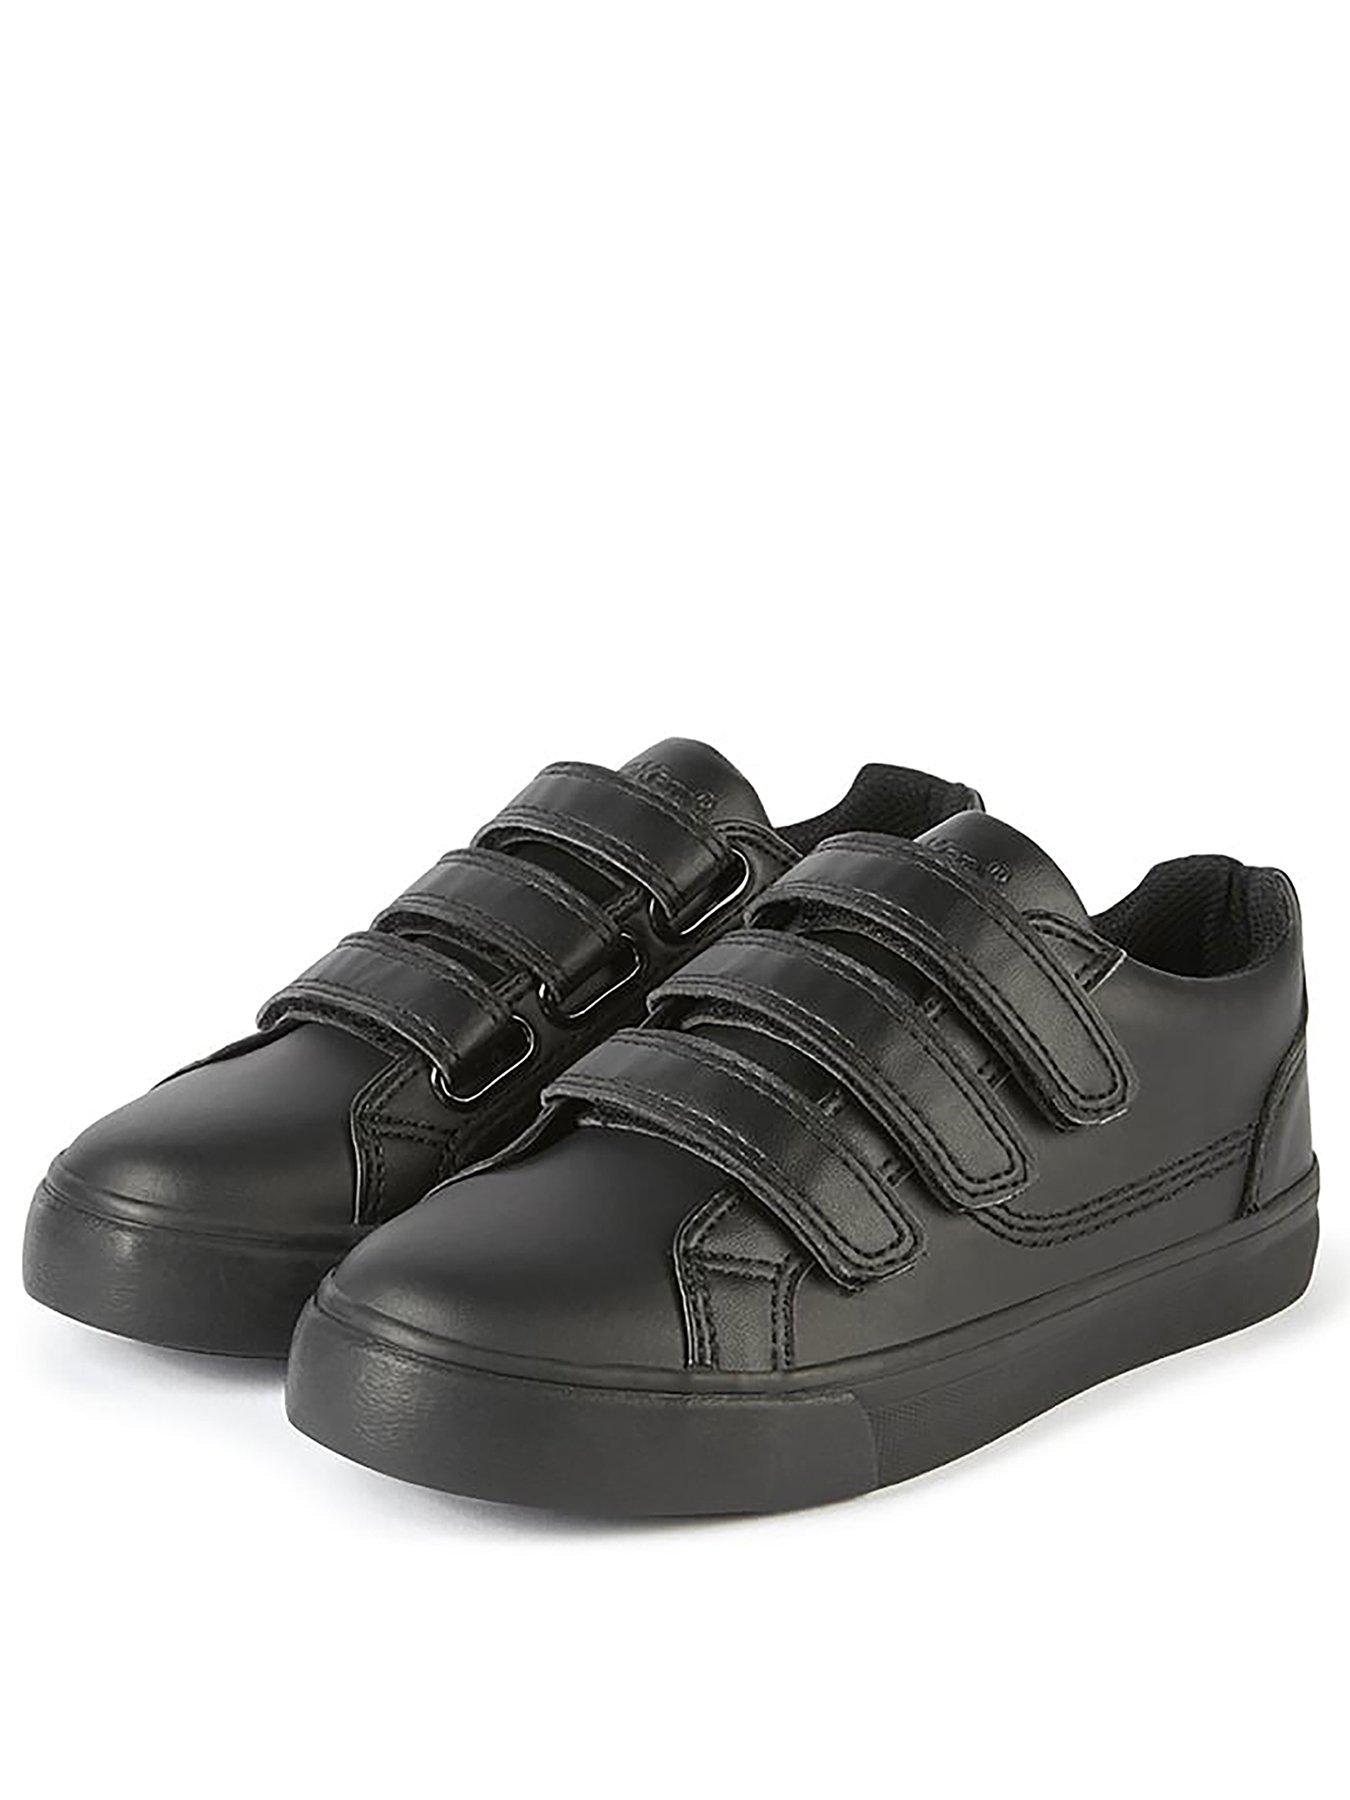 Fashion Sneakers Kickers Unisex Adults 